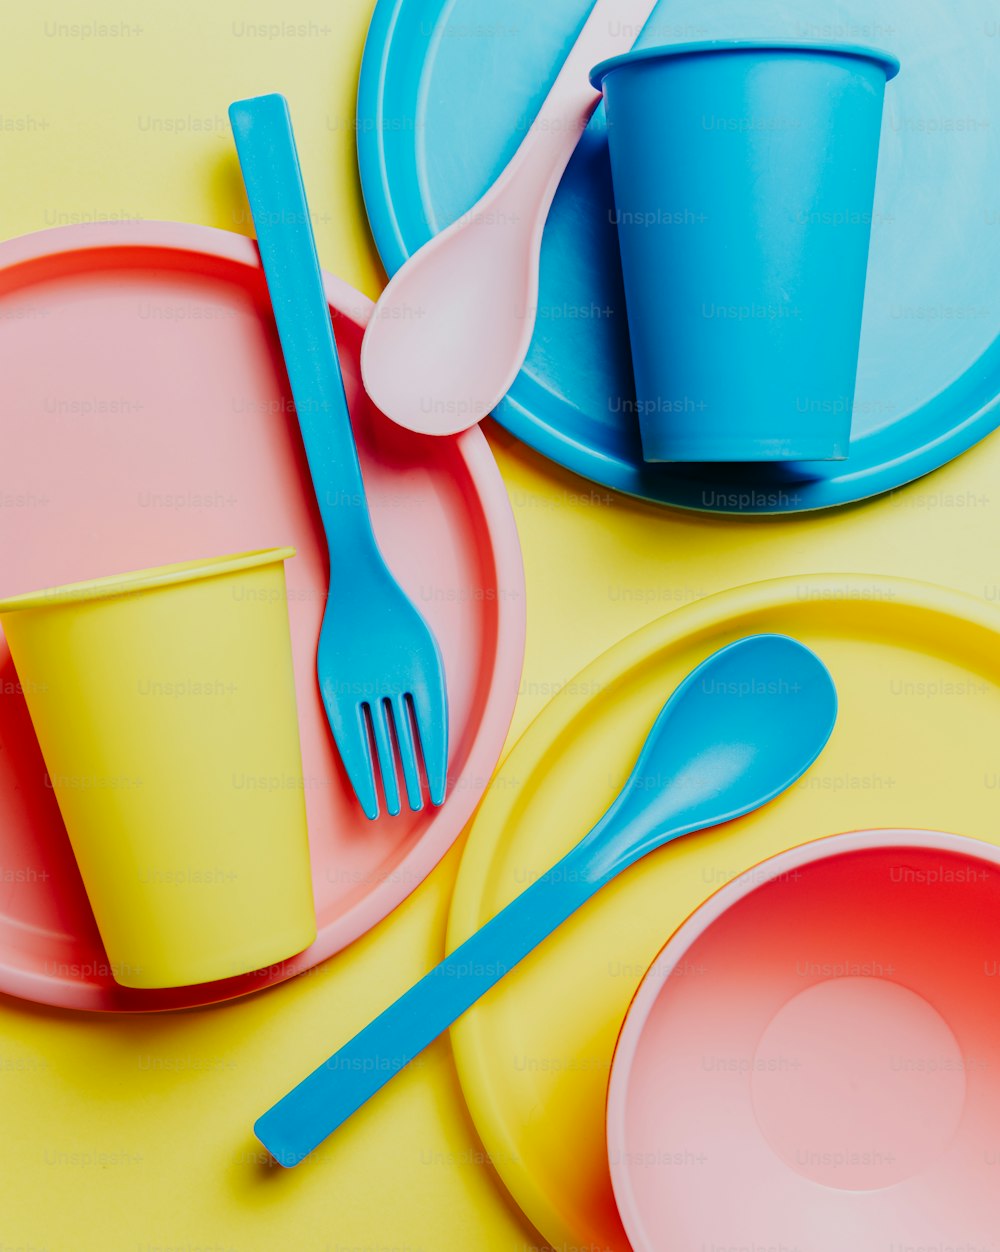 a yellow and blue plate with a cup and a fork